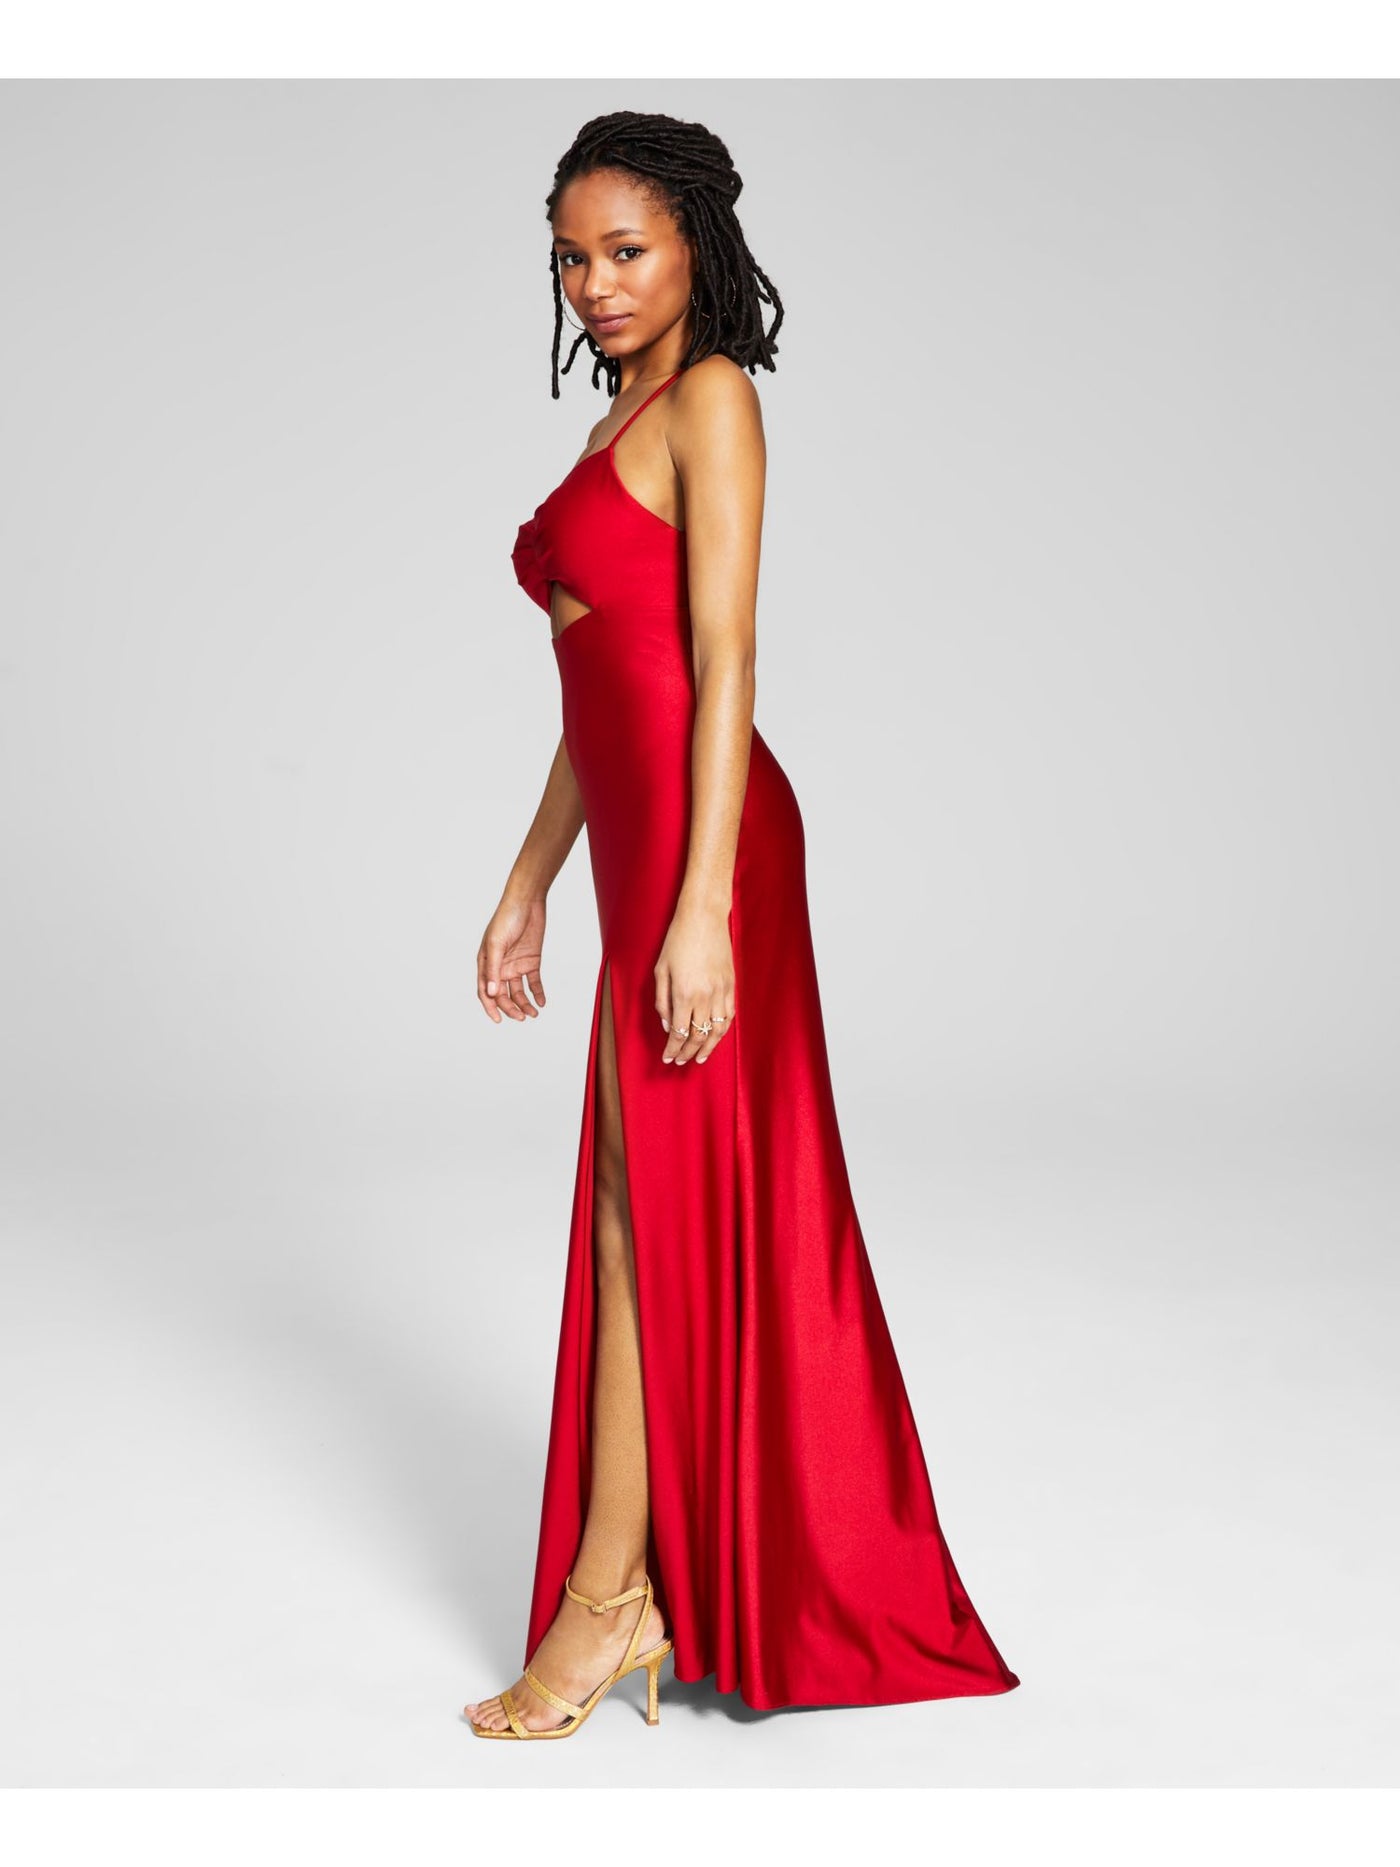 BLONDIE NITES Womens Red Stretch Cut Out Zippered Hook Back Closure Padded Cups Spaghetti Strap Sweetheart Neckline Full-Length Prom Gown Dress Juniors 3